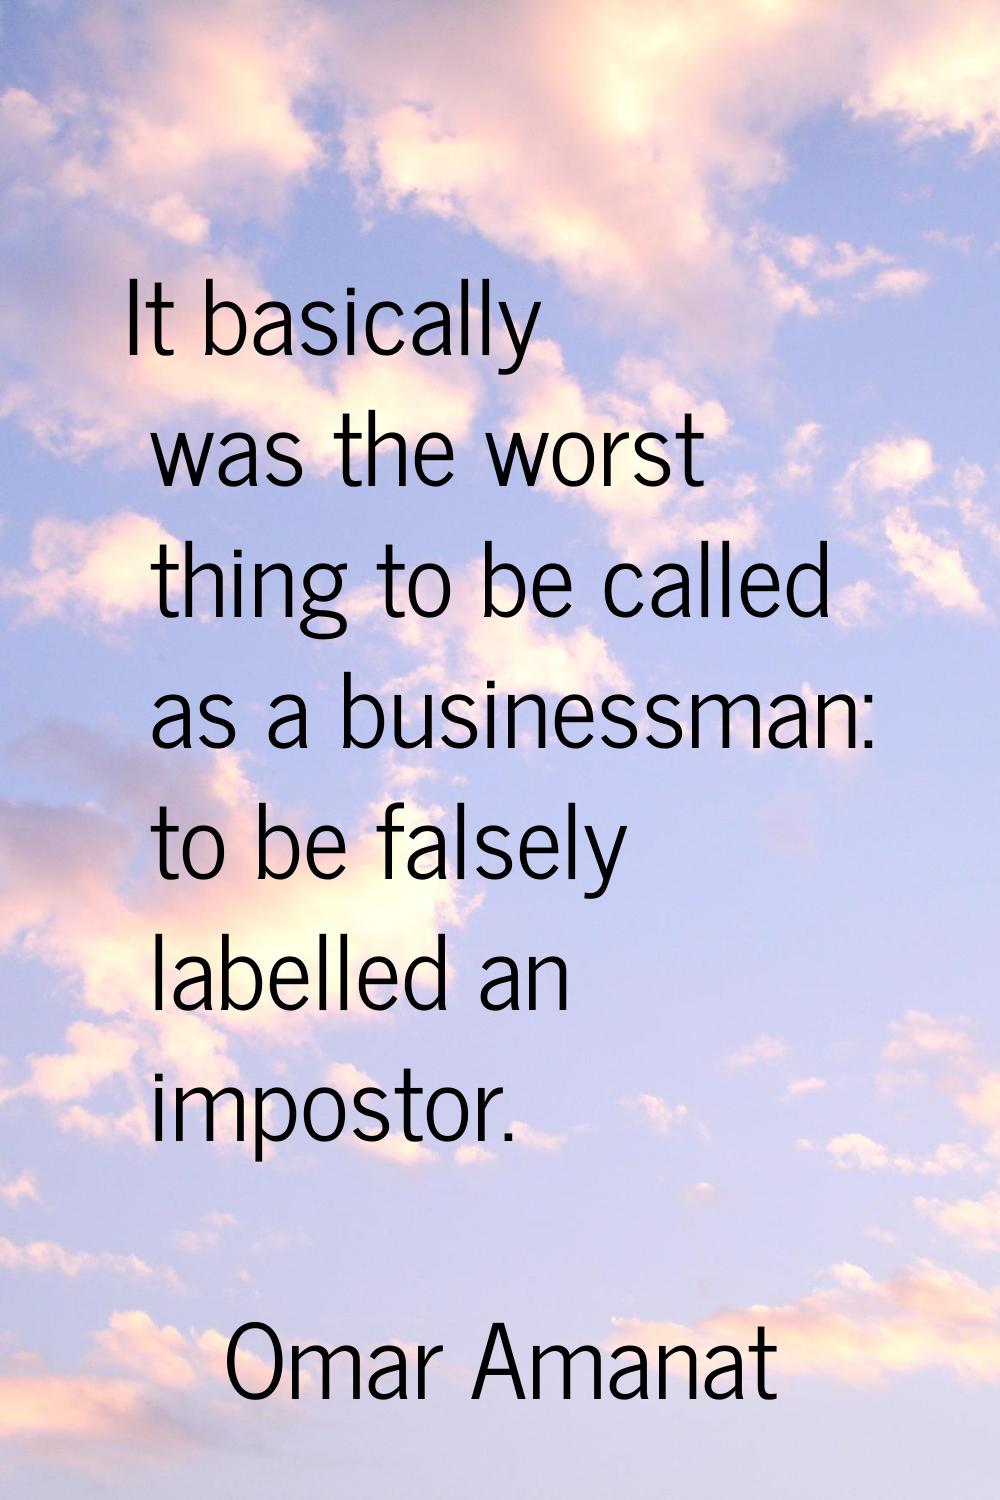 It basically was the worst thing to be called as a businessman: to be falsely labelled an impostor.